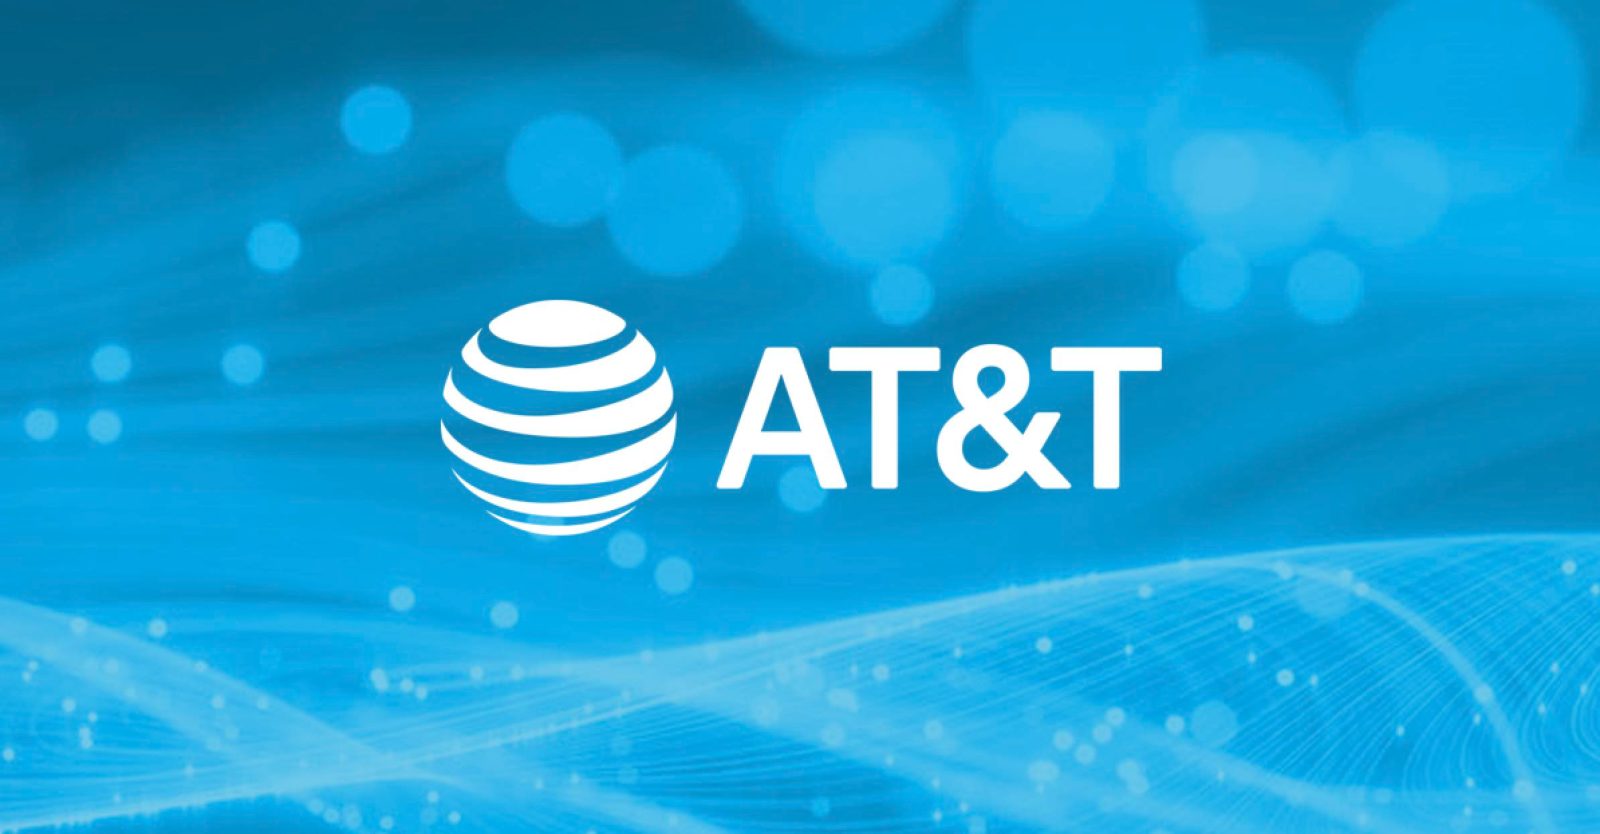 AT&T launches new multi-gig fiber internet, commits to ‘simple, straightforward pricing’